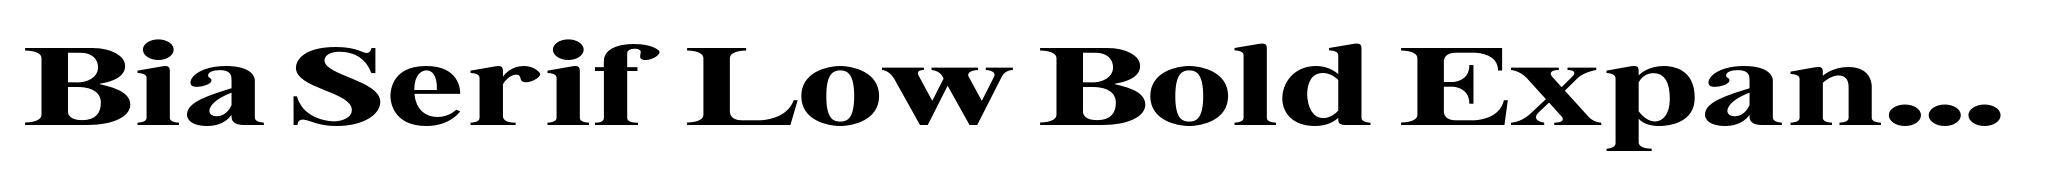 Bia Serif Low Bold Expanded image